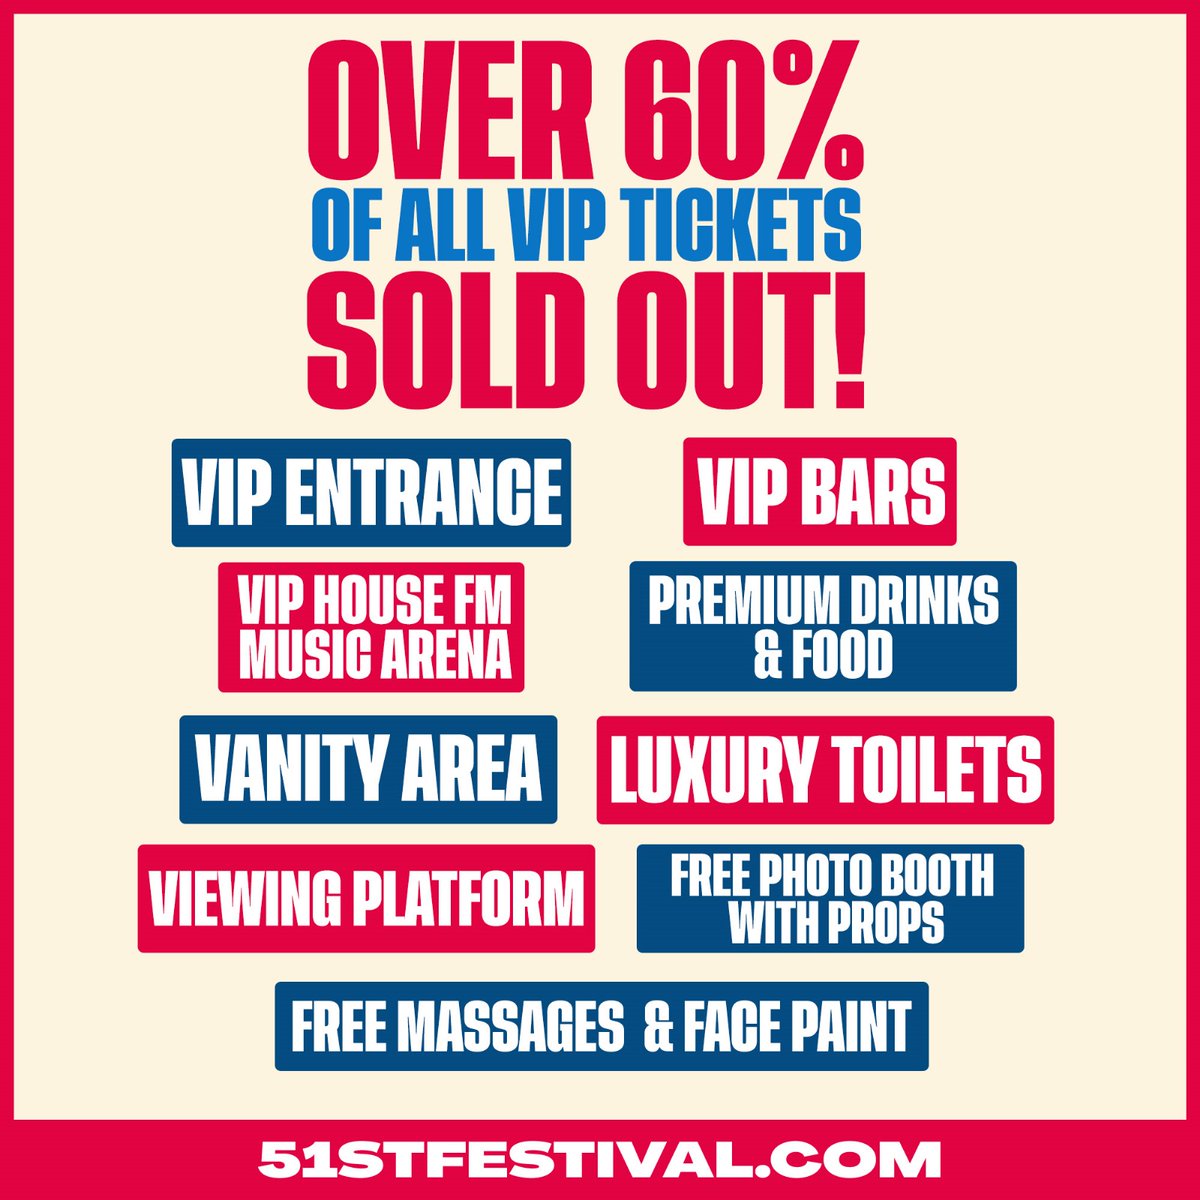 Over 60% of VIP tickets have SOLD OUT for 51st Festival. Get yours now before it's too late 🤝 51stfestival.com/pages/tickets @GrooveOdyssey @BackTo95 @RampageSound @HSE_FM